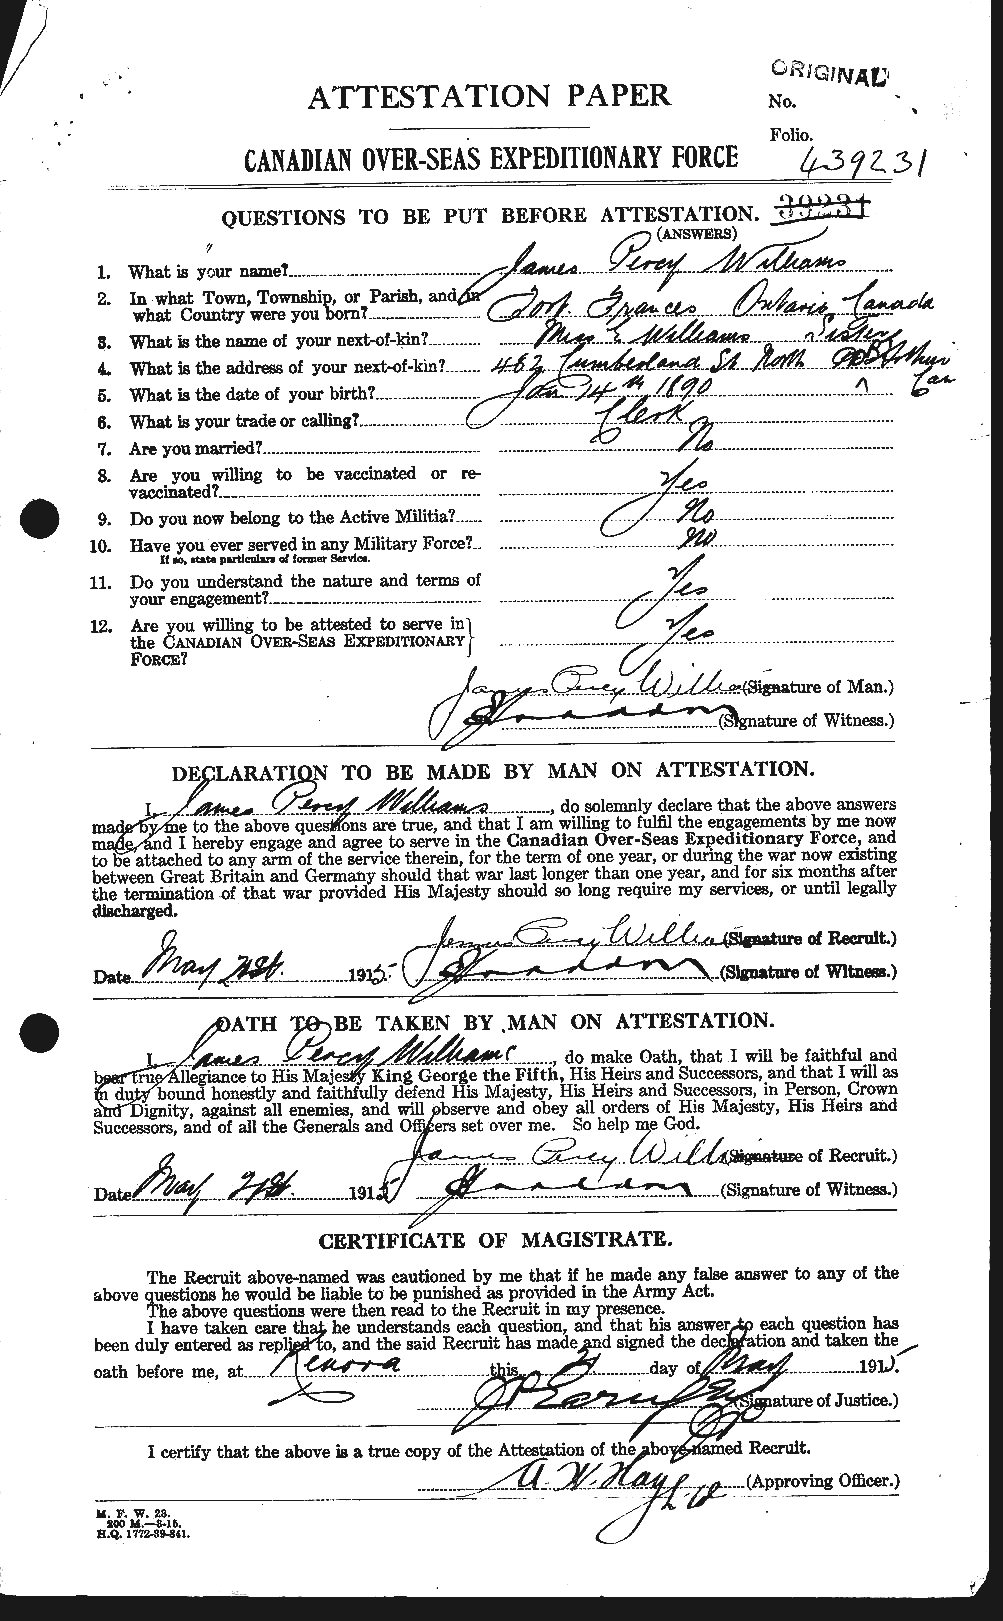 Personnel Records of the First World War - CEF 677558a